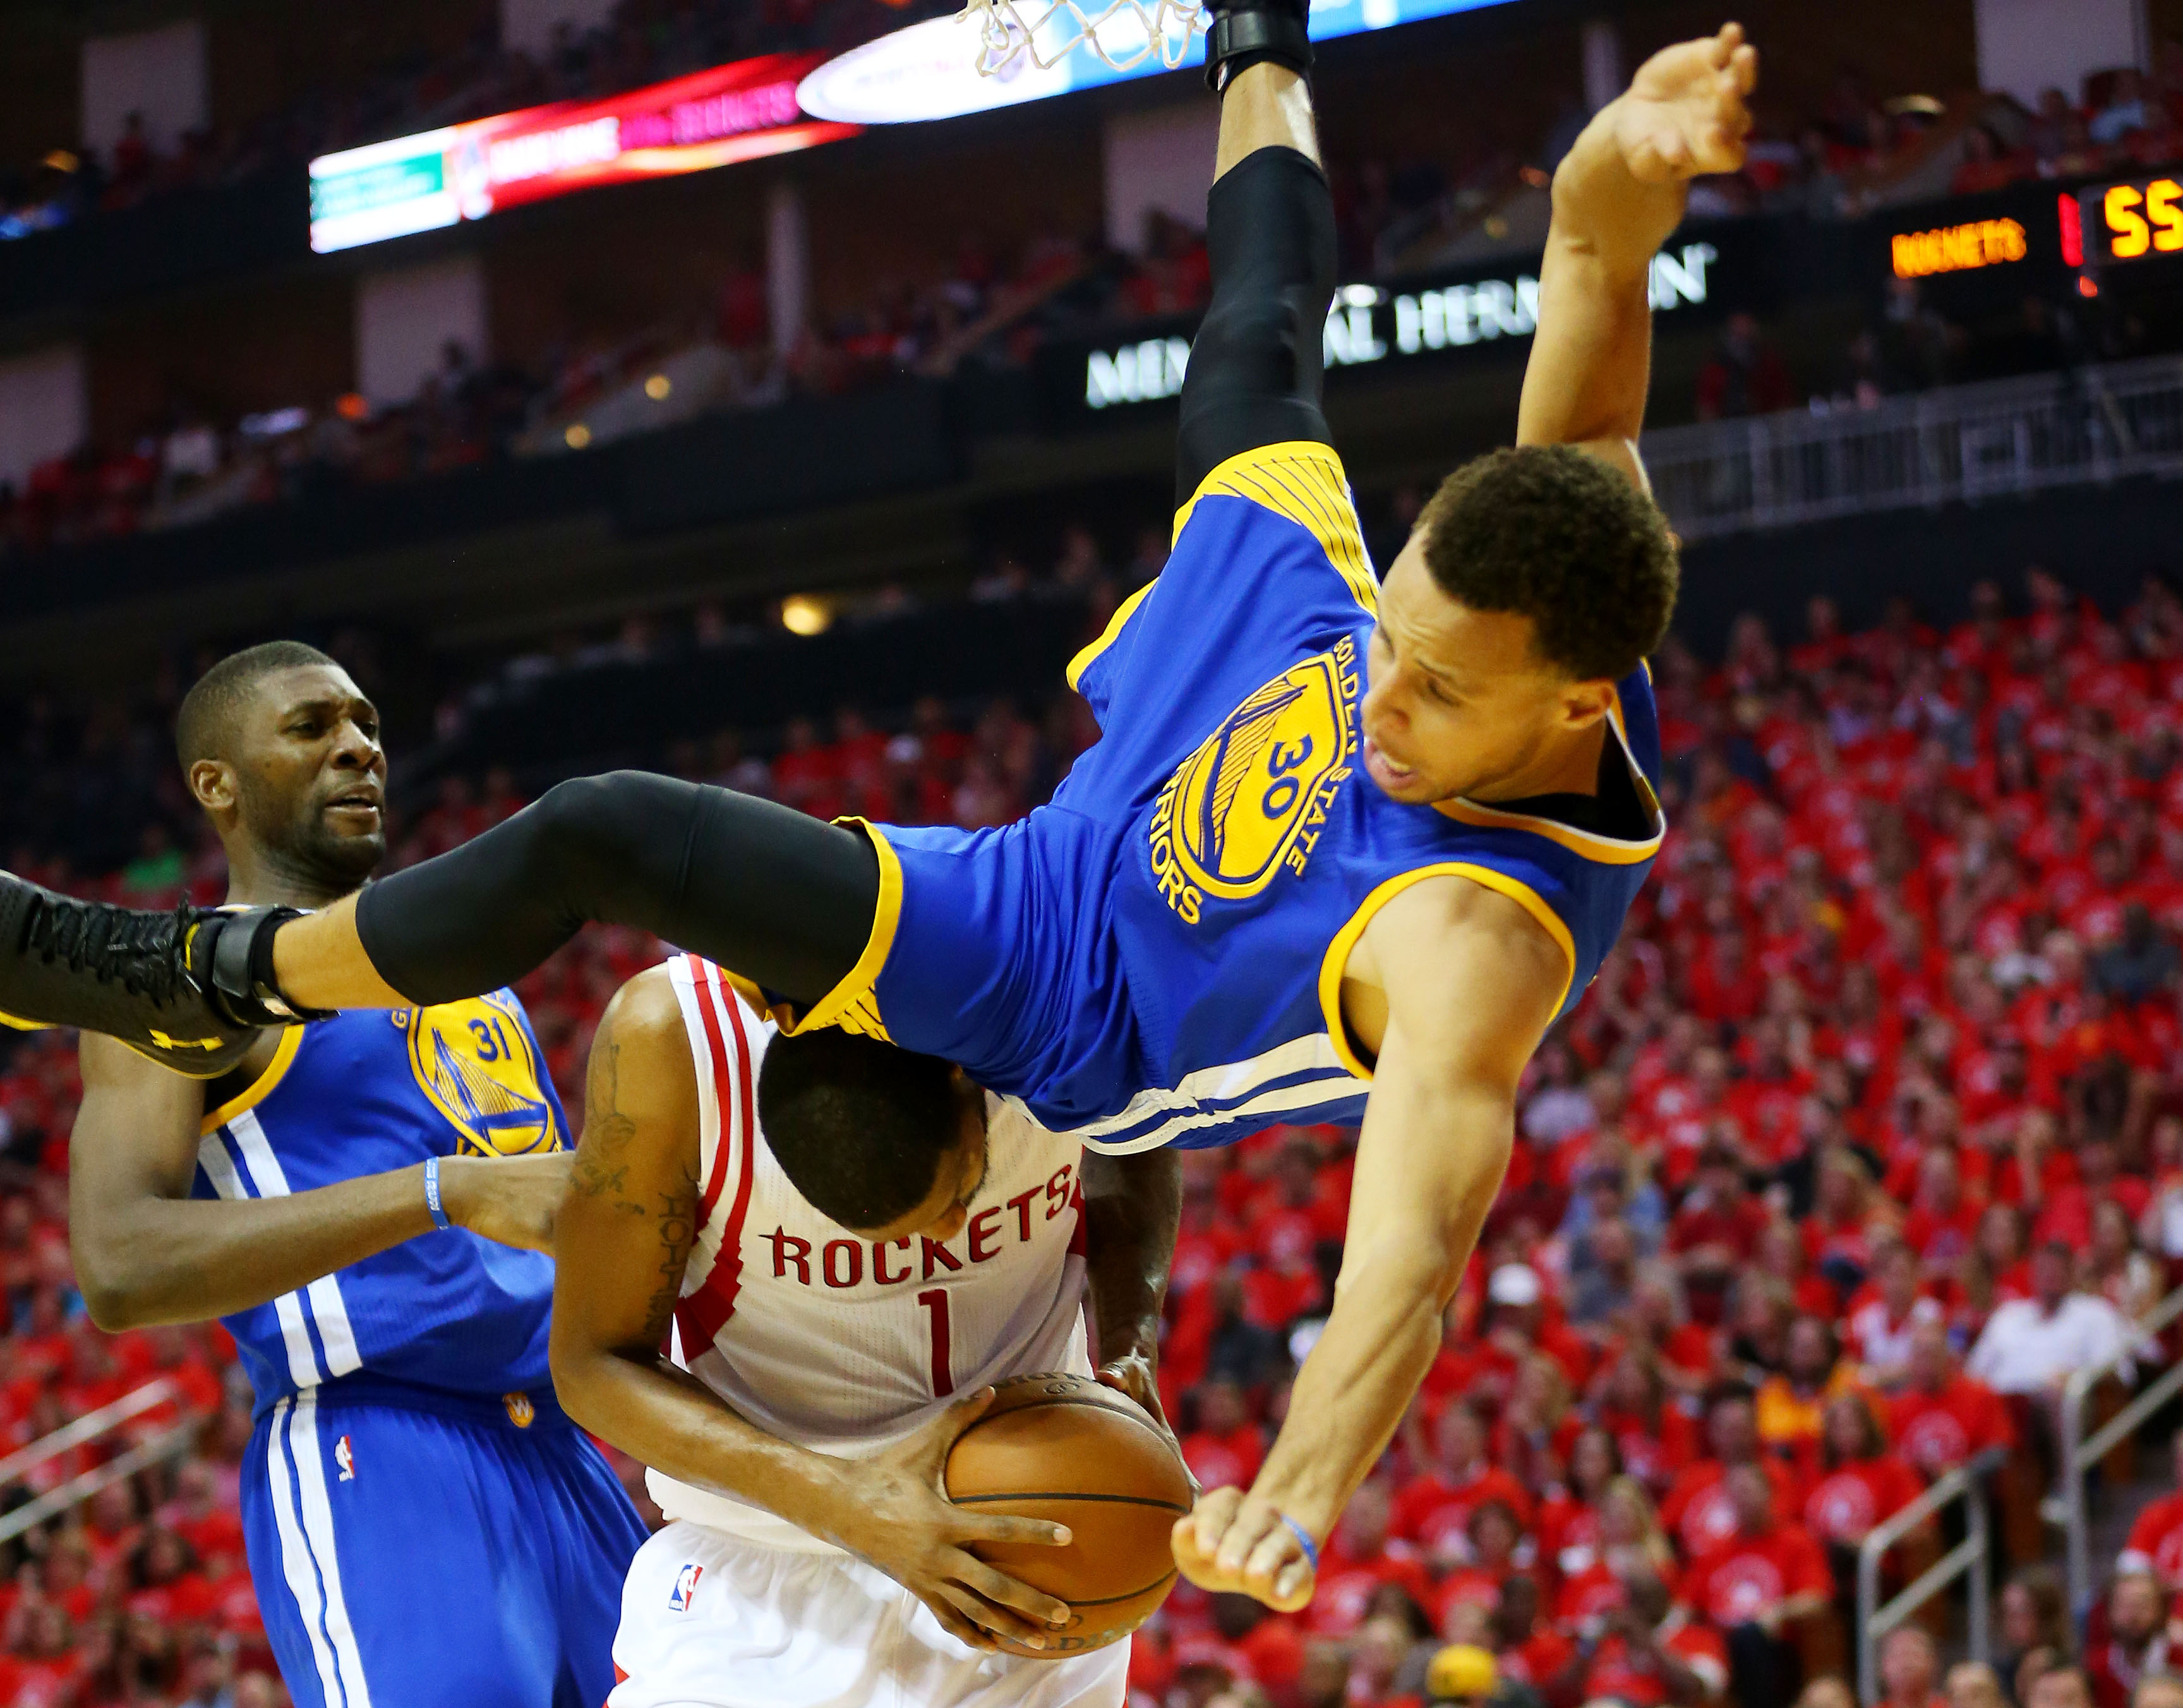 Steph Curry Head Injury 5 Fast Facts You Need to Know